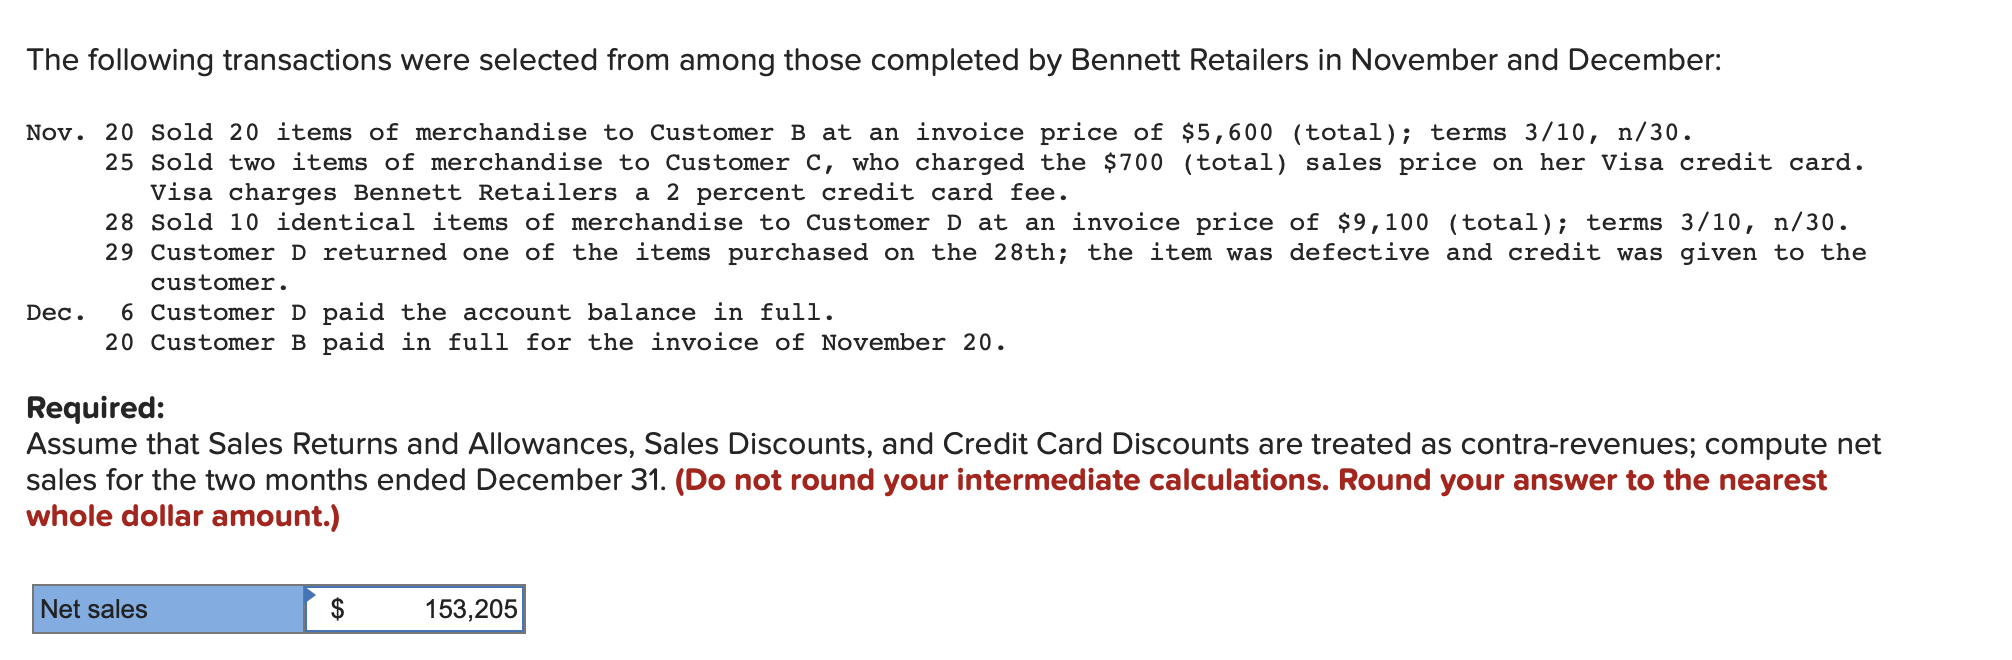 The following transactions were selected from among those completed by Bennett Retailers in November and December:
Nov. 20 Sold 20 items of merchandise to Customer B at an invoice price of $5,600 (total); terms 3/10, n/30.
25 Sold two items of merchand:ise to Customer C, who charged the $700 (total) sales price on her Visa credit card.
Visa charges Bennett Retailers a 2 percent credit card fee.
28 Sold 10 identical items of merchandise to Customer D at an invoice price of $9,100 (total); terms 3/10, n/30.
29 Customer D returned one of the items purchased on the 28th; the item was defective and credit was given to the
customer.
6 Customer D paid the account balance in full.
20 Customer B paid in full for the invoice of November 20.
Dec
Required:
Assume that Sales Returns and Allowances, Sales Discounts, and Credit Card Discounts are treated as contra-revenues; compute net
sales for the two months ended December 31. (Do not round your intermediate calculations. Round your answer to the nearest
whole dollar amount.)
$
Net sales
153,205
